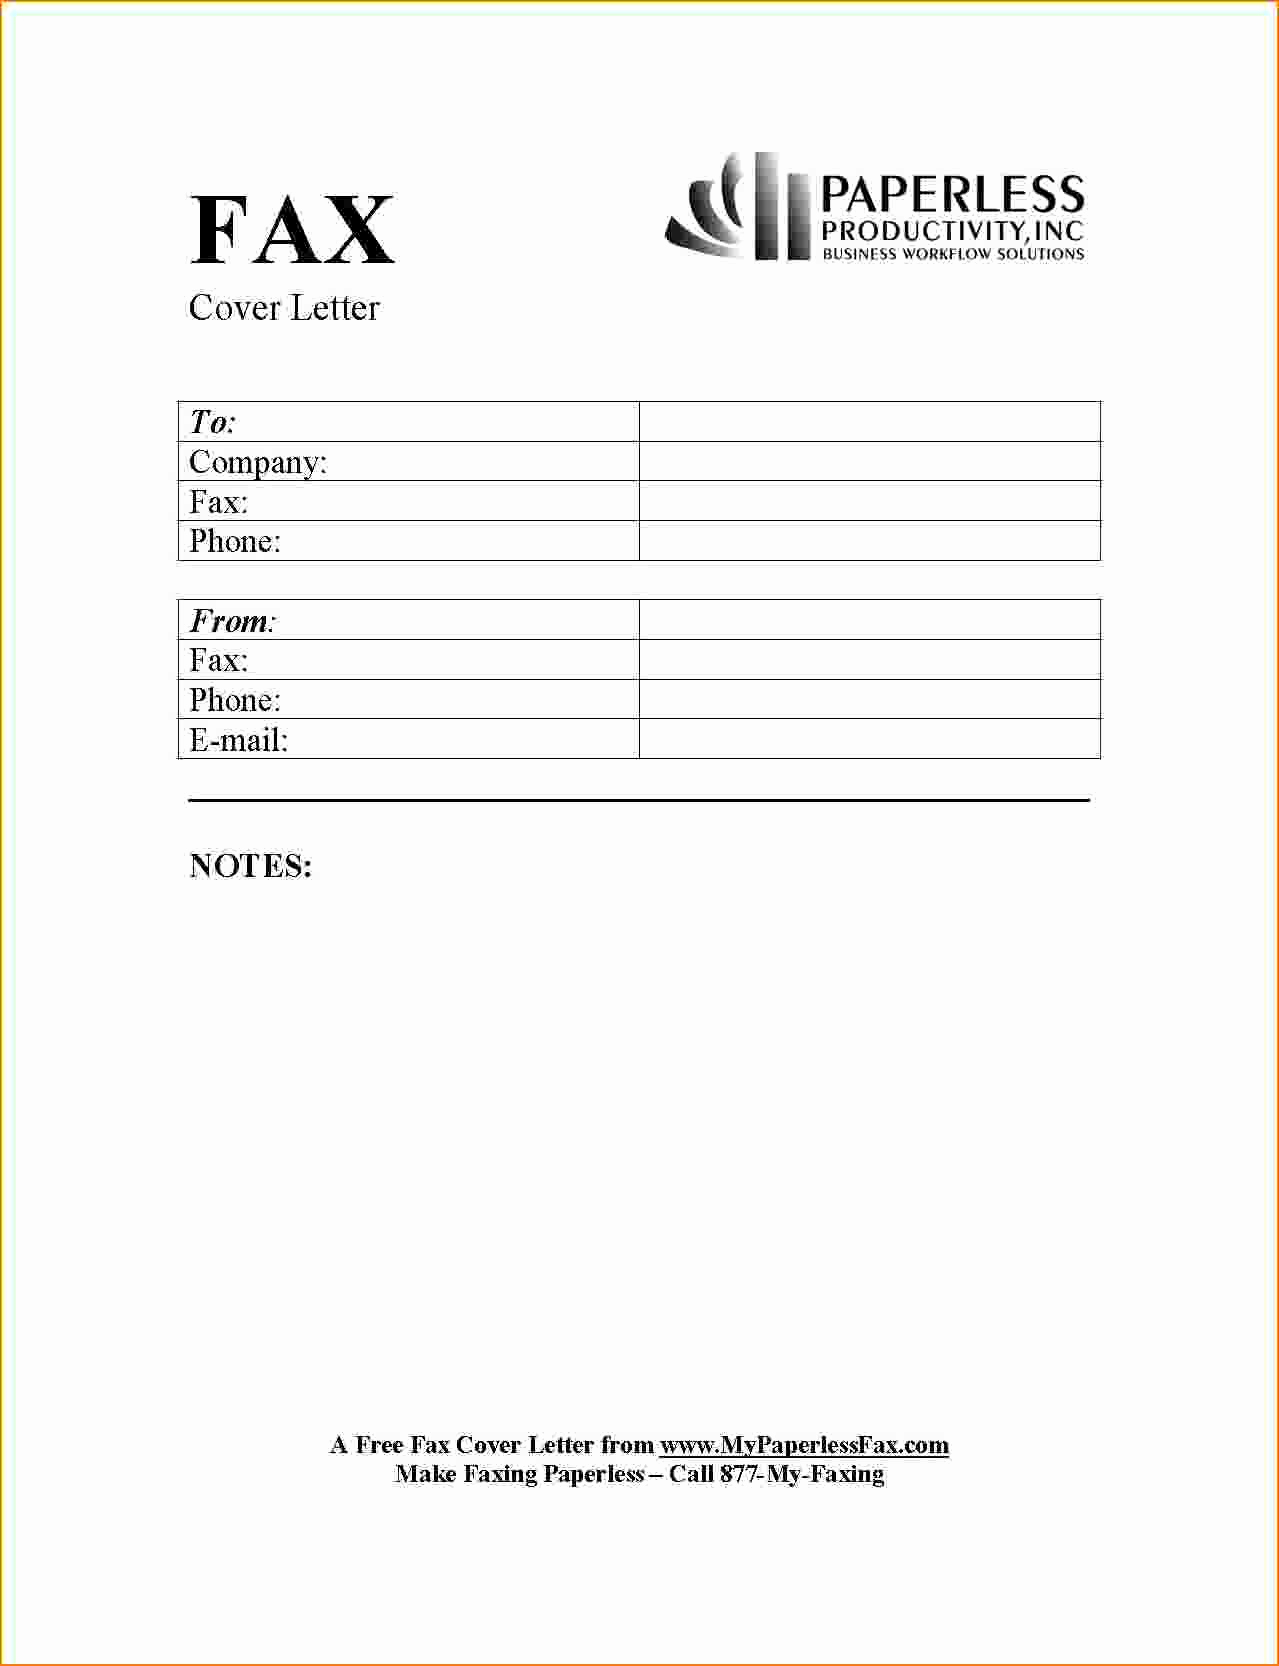 Cover Letter for Fax Inspirational 6 Fax Cover Letter Template